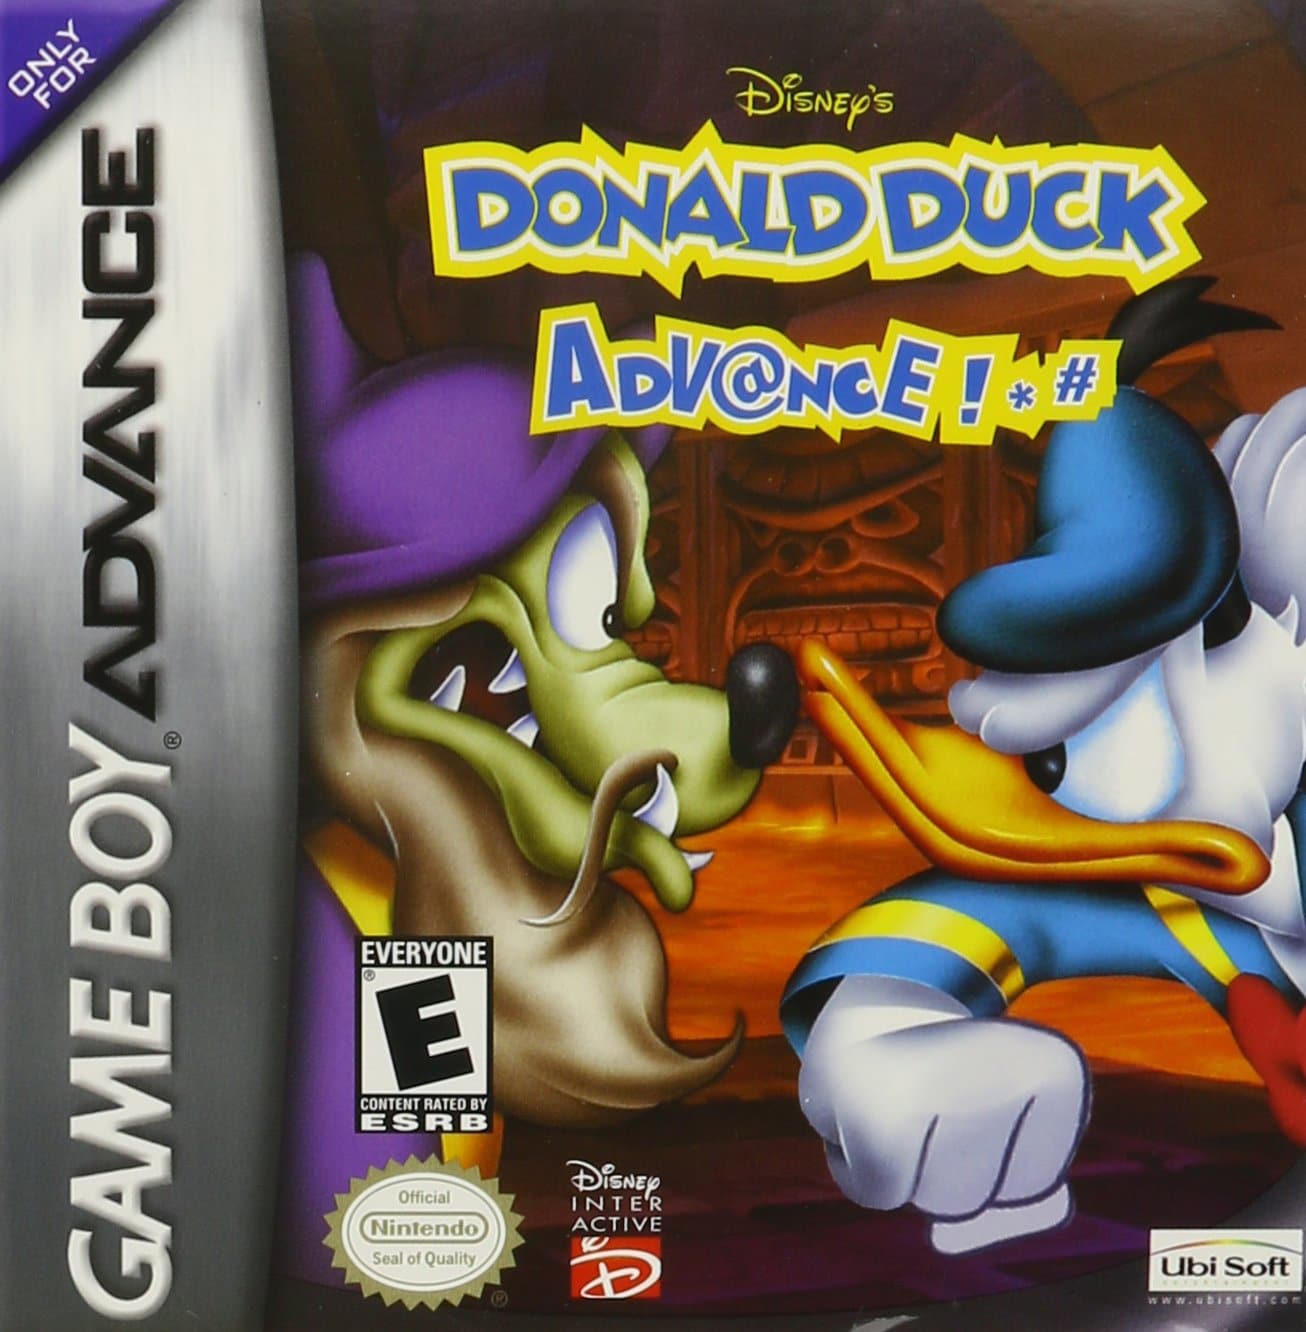 Donald Duck Advance player count stats